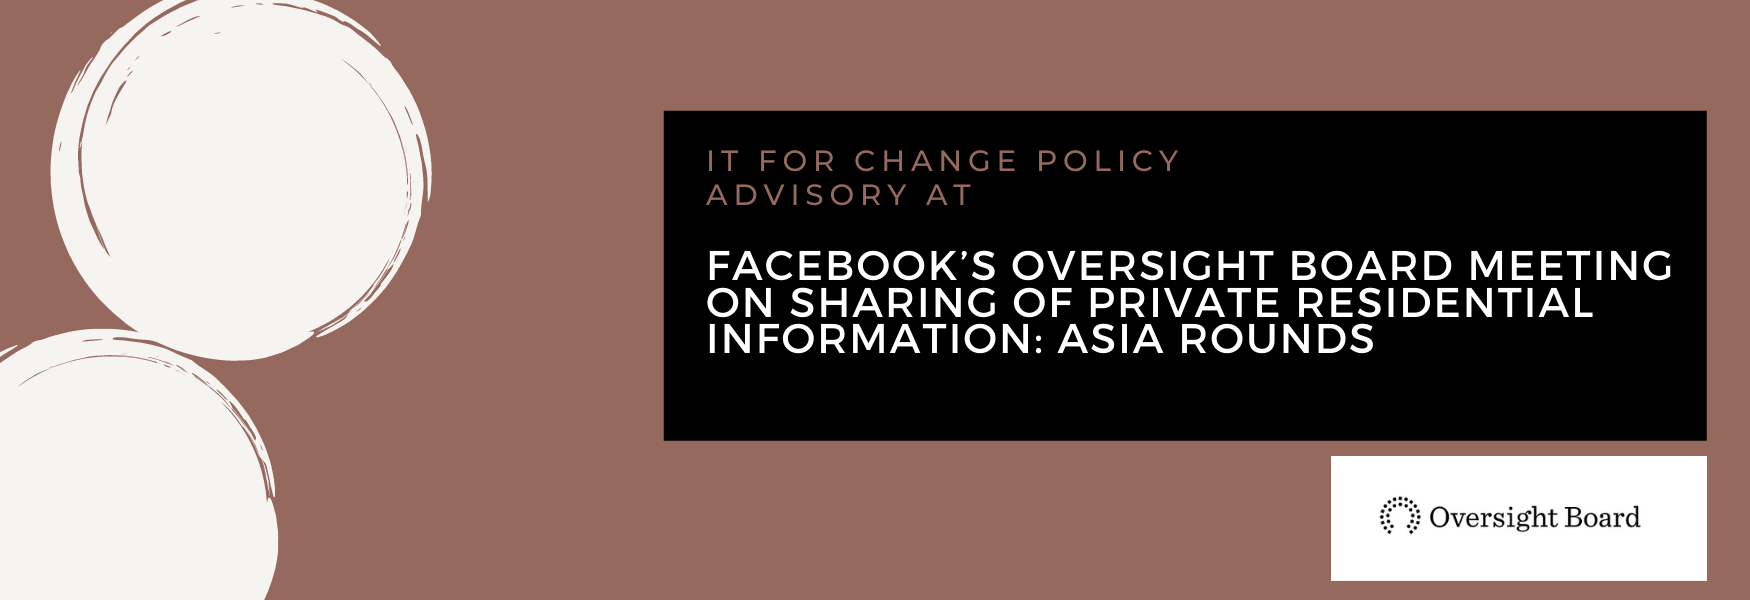 Facebook’s Oversight Board Meeting on Sharing of Private Residential Information: Asia Rounds